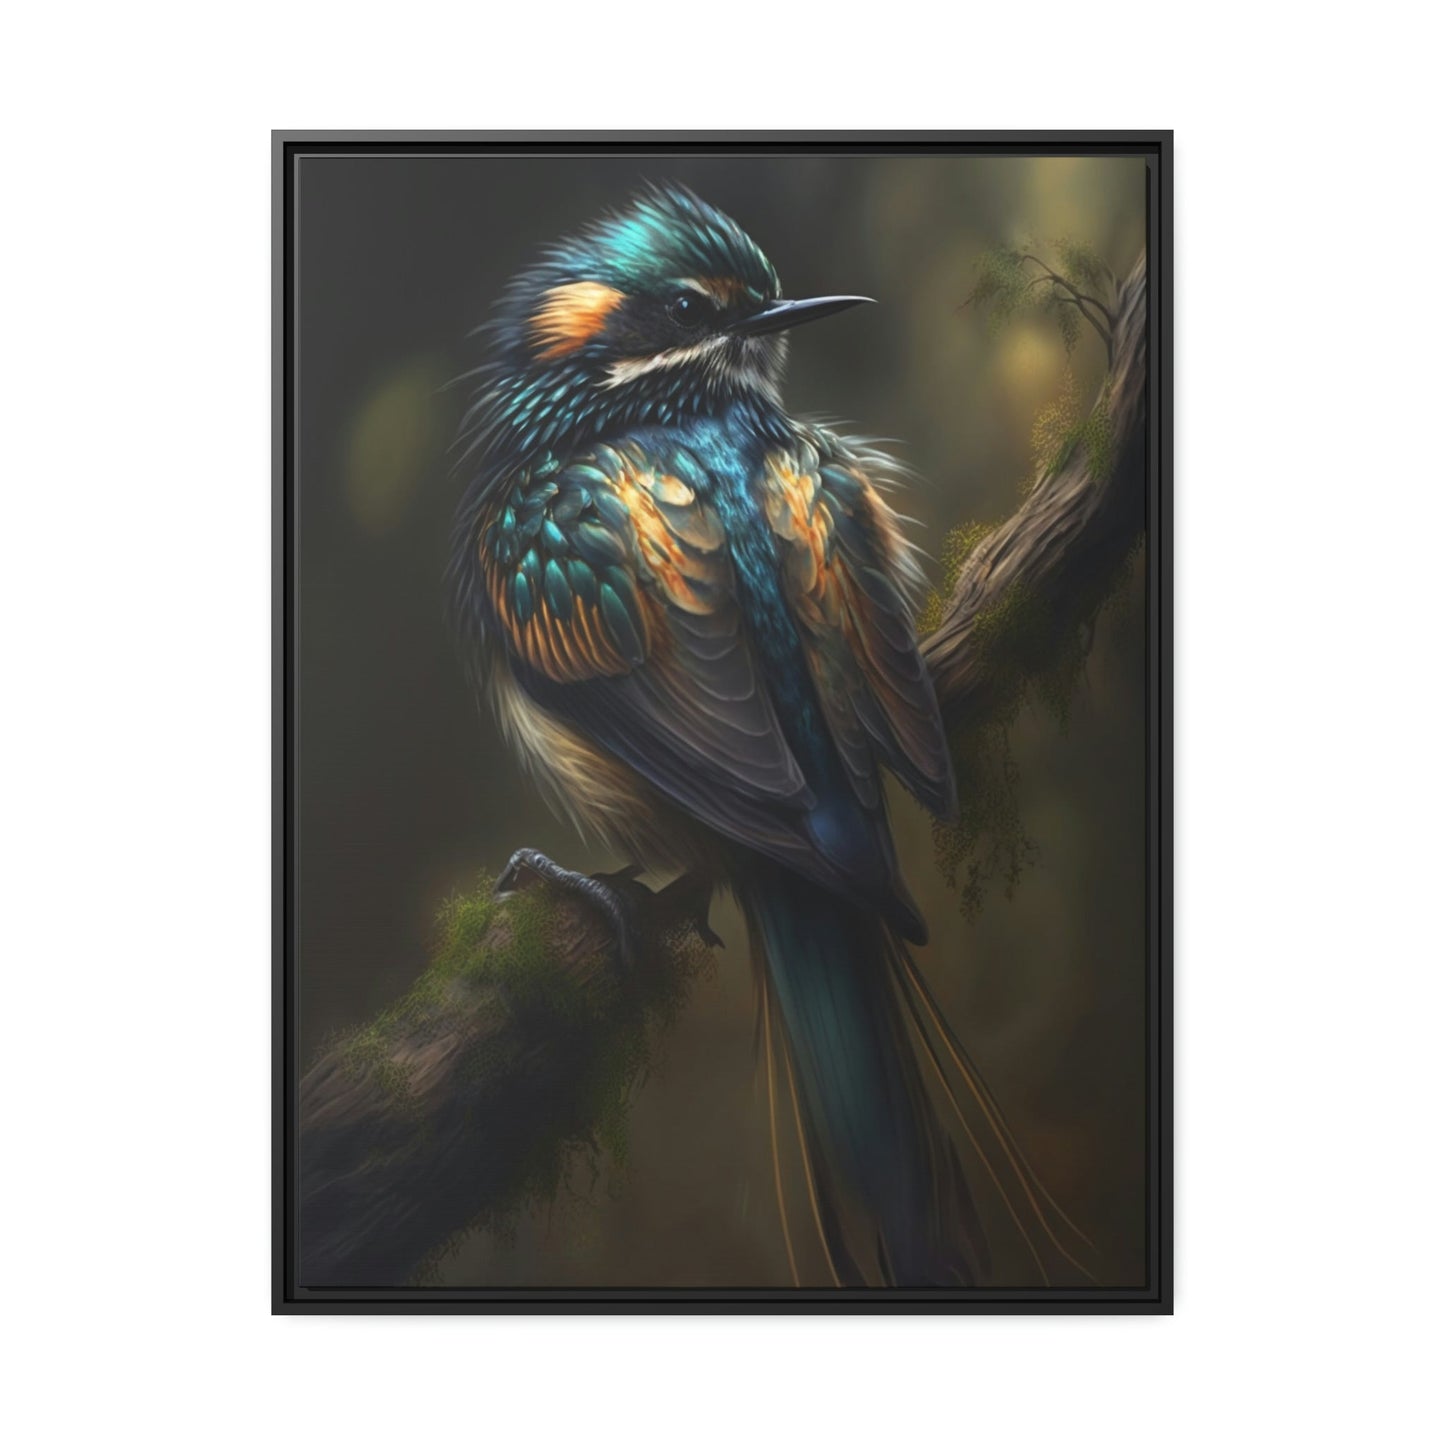 The Birds' Paradise: A Natural Canvas & Poster Print of Birds in Forest